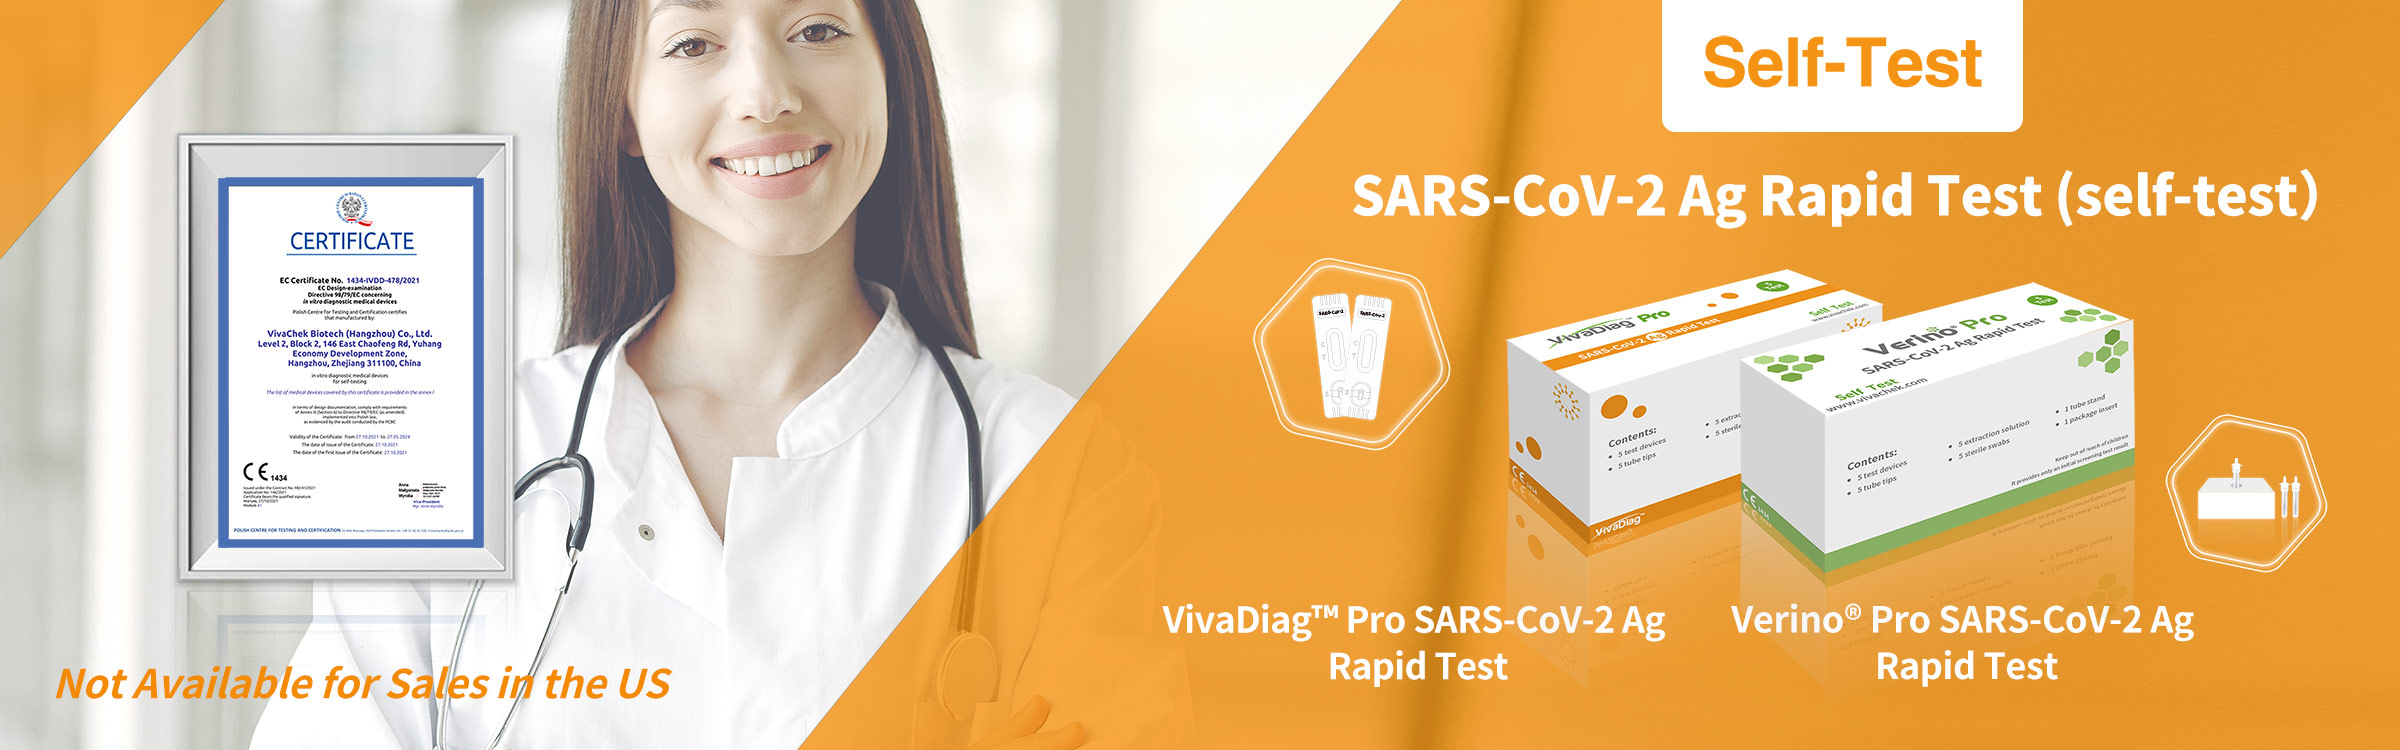 VivaDiag™ Pro SARS-CoV-2 Ag Rapid Test is for the rapid, qualitative detection of the
							nucleocapsid protein antigen from SARS-CoV-2 in human anterior nasal swab specimen.